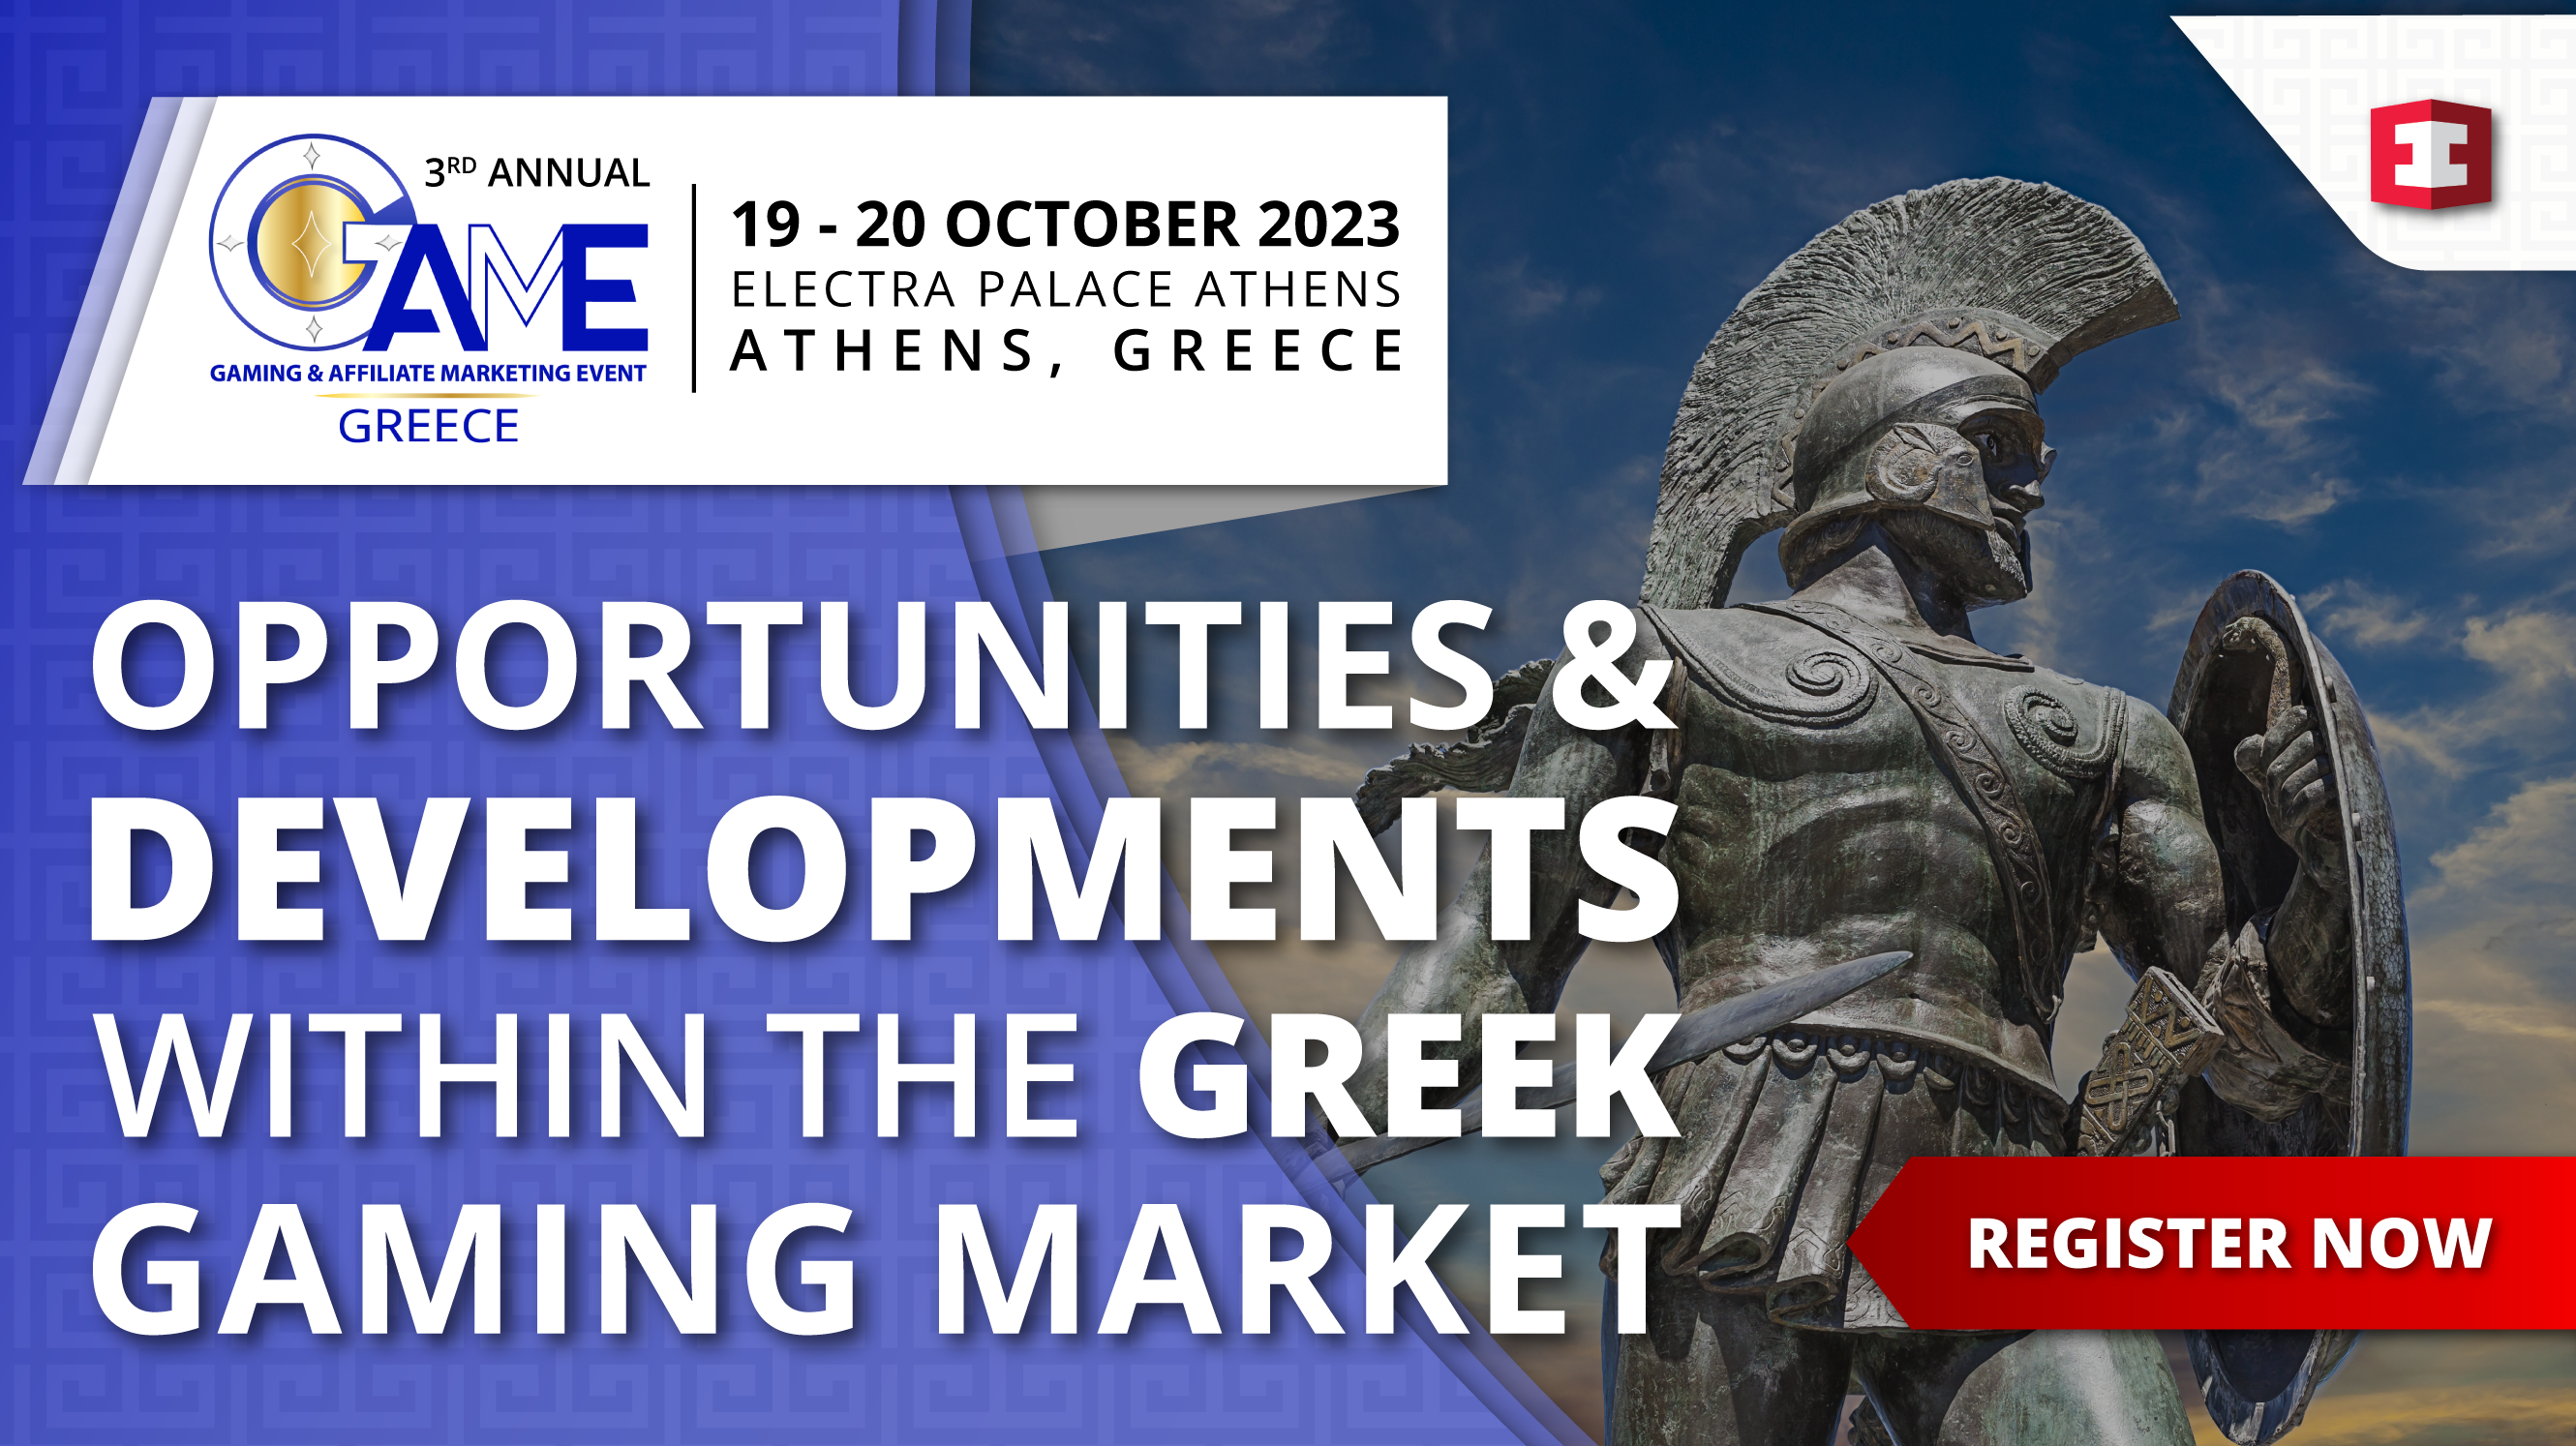 Opportunities & Developments Within the Greek Gaming Market - Here’s What You Need to Know